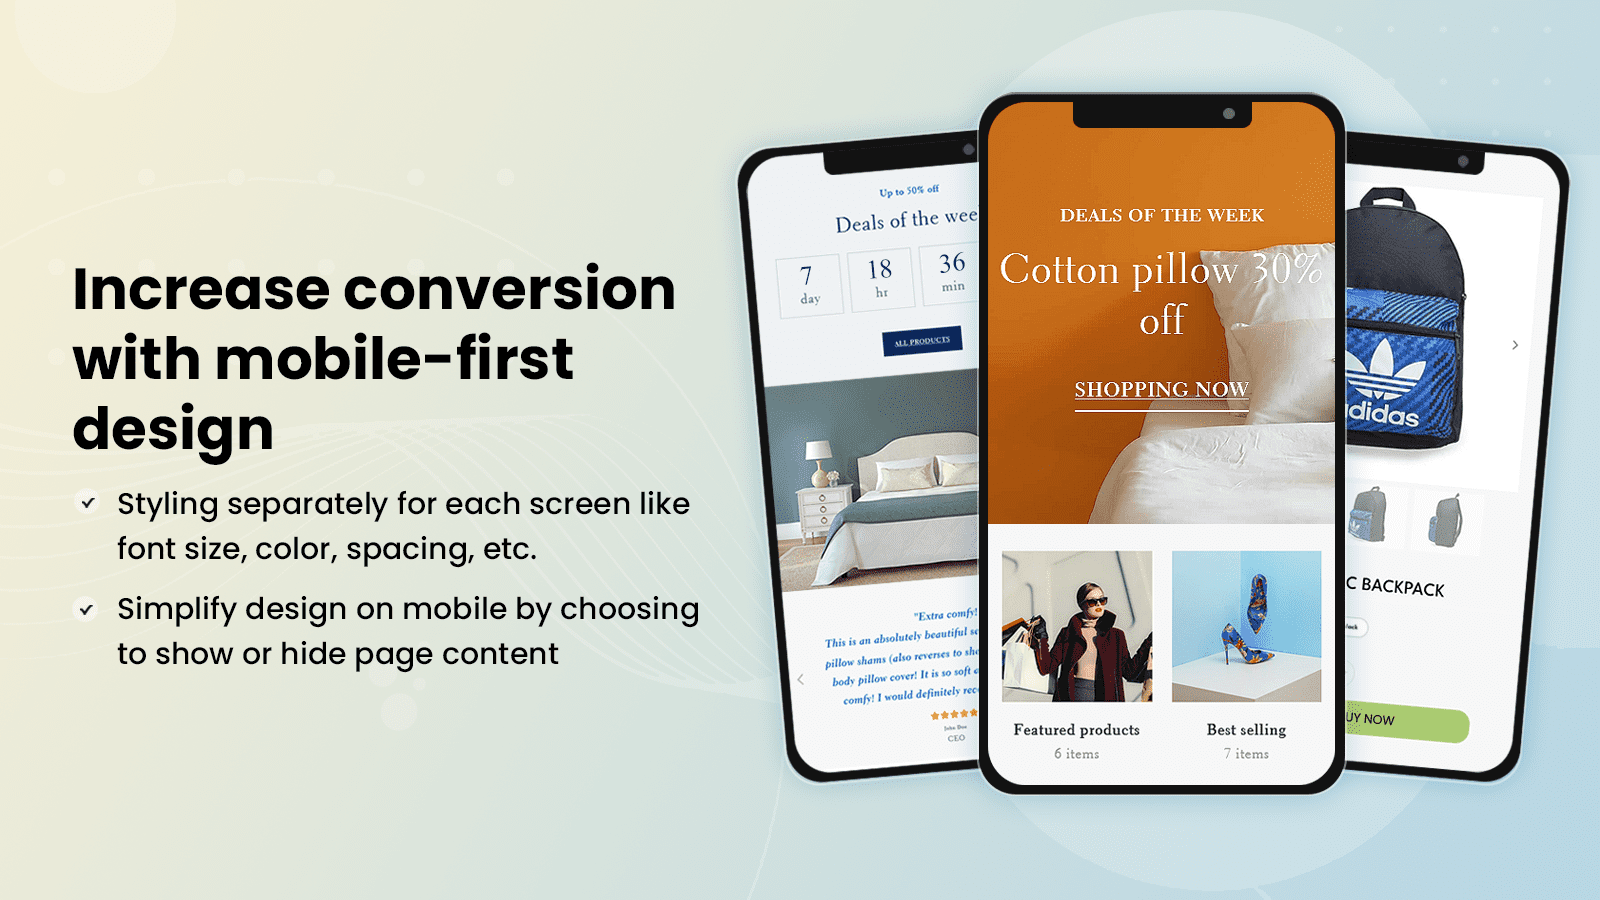 Optimized for mobile devices and increase conversion rate